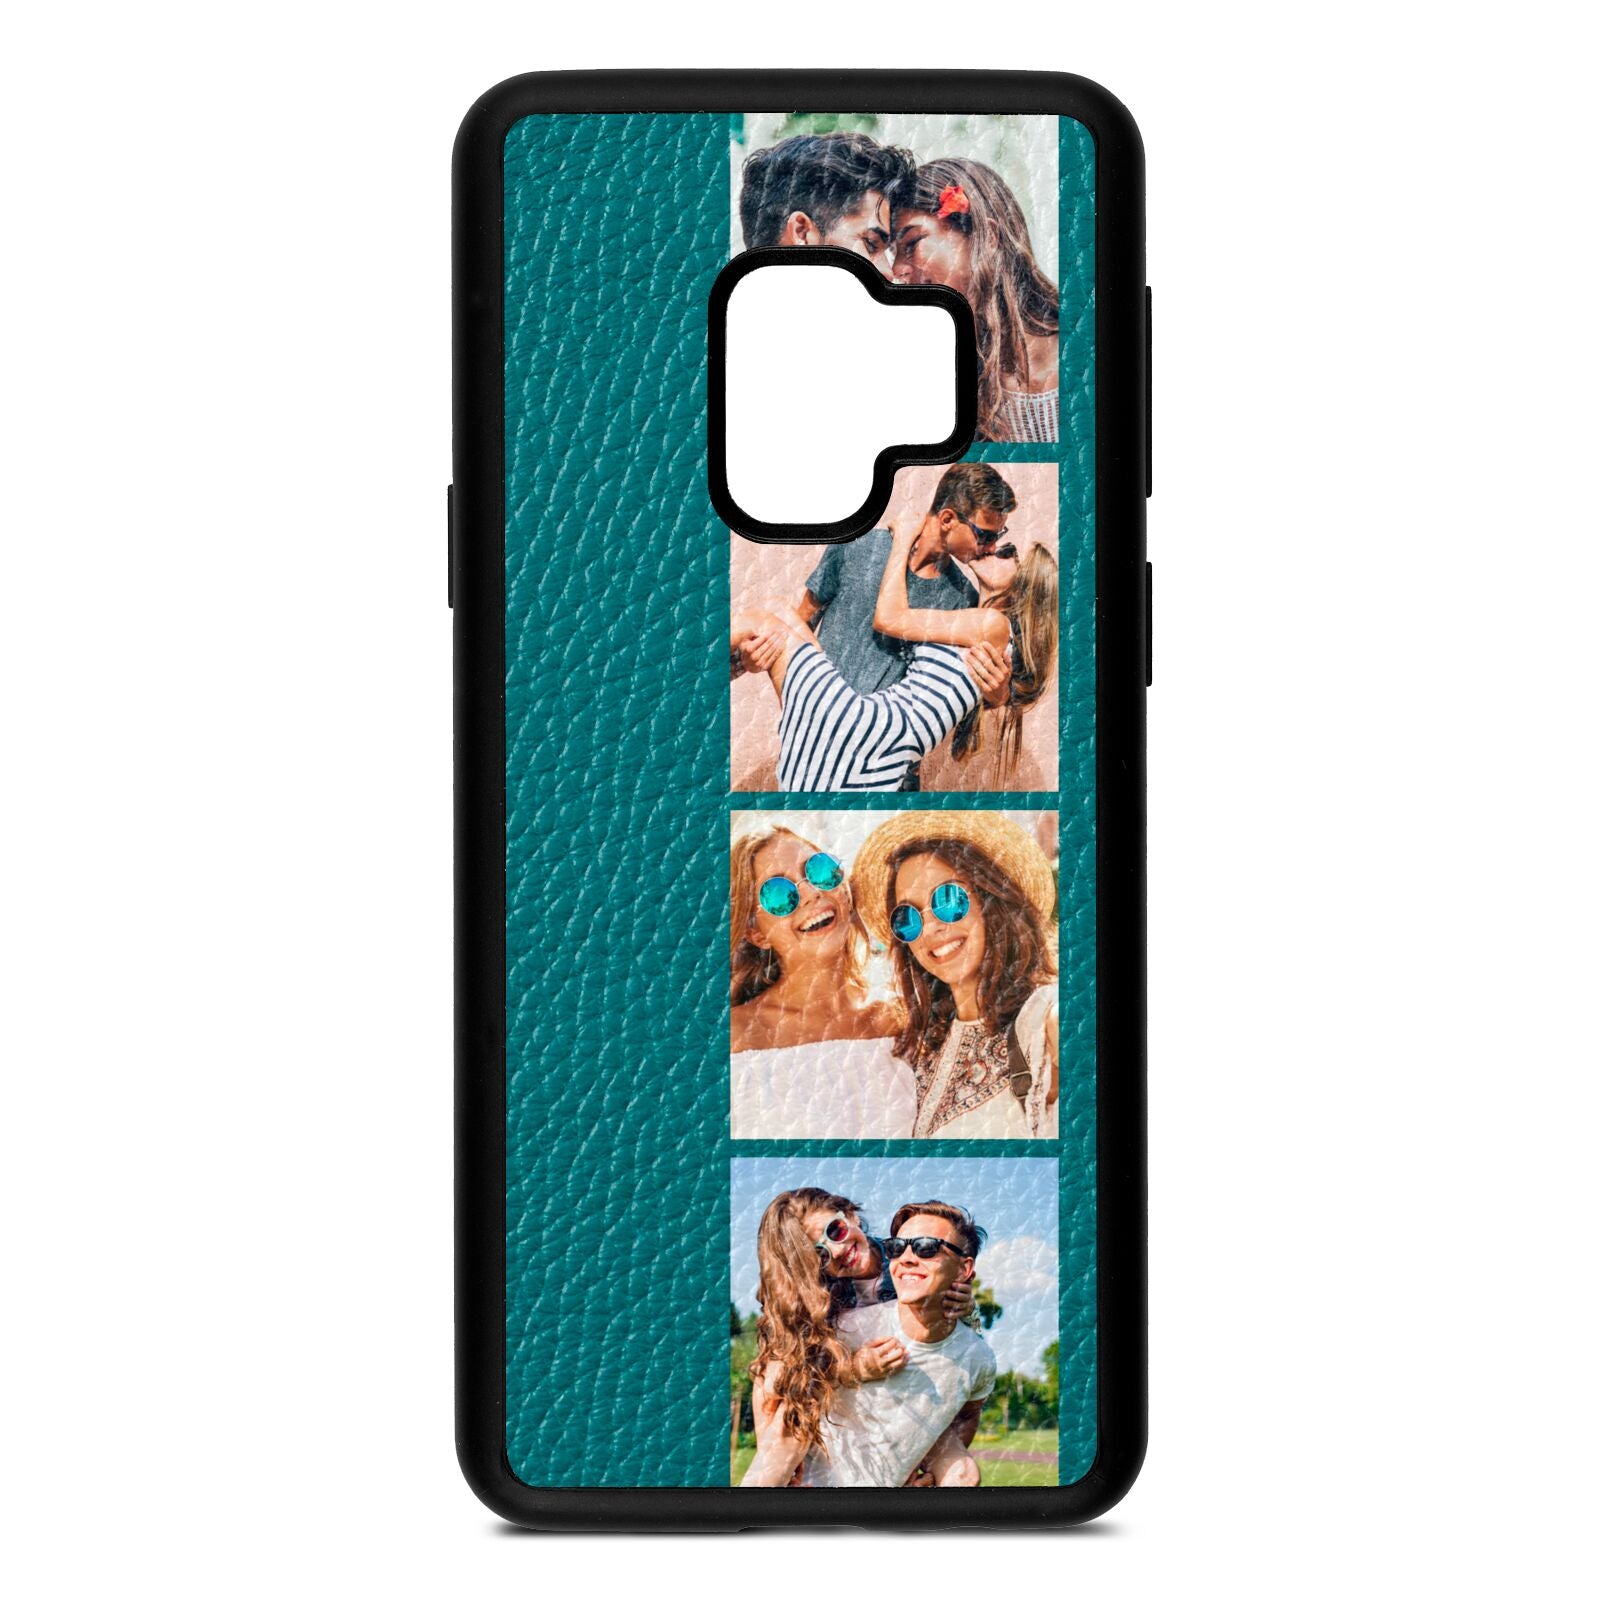 Photo Strip Montage Upload Green Pebble Leather Samsung S9 Case